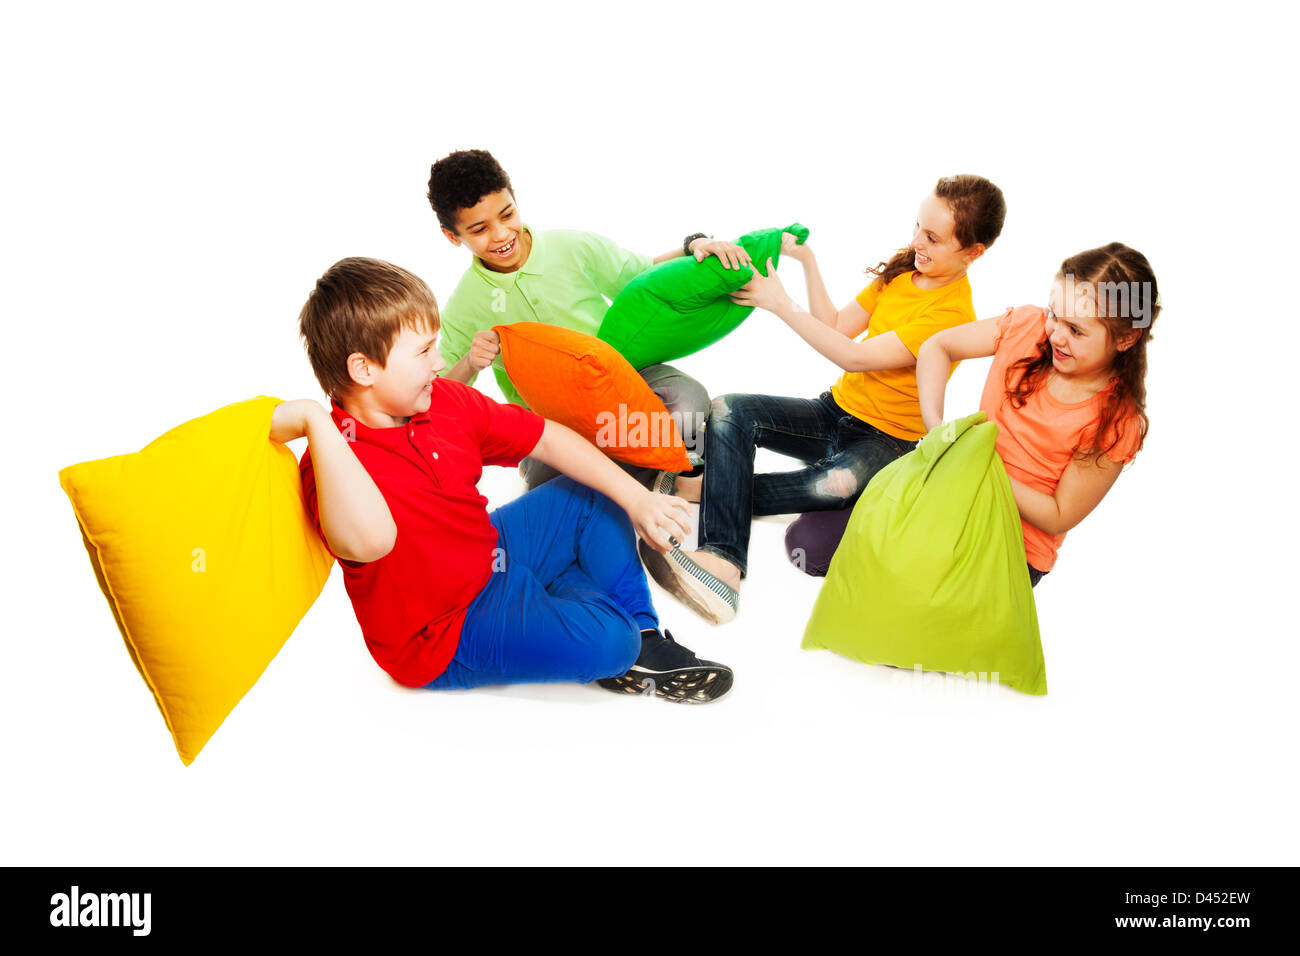 Cute four teen kids, boys and girls fighting with pillows, laughing, smiling and having fun, isolated on white Stock Photo